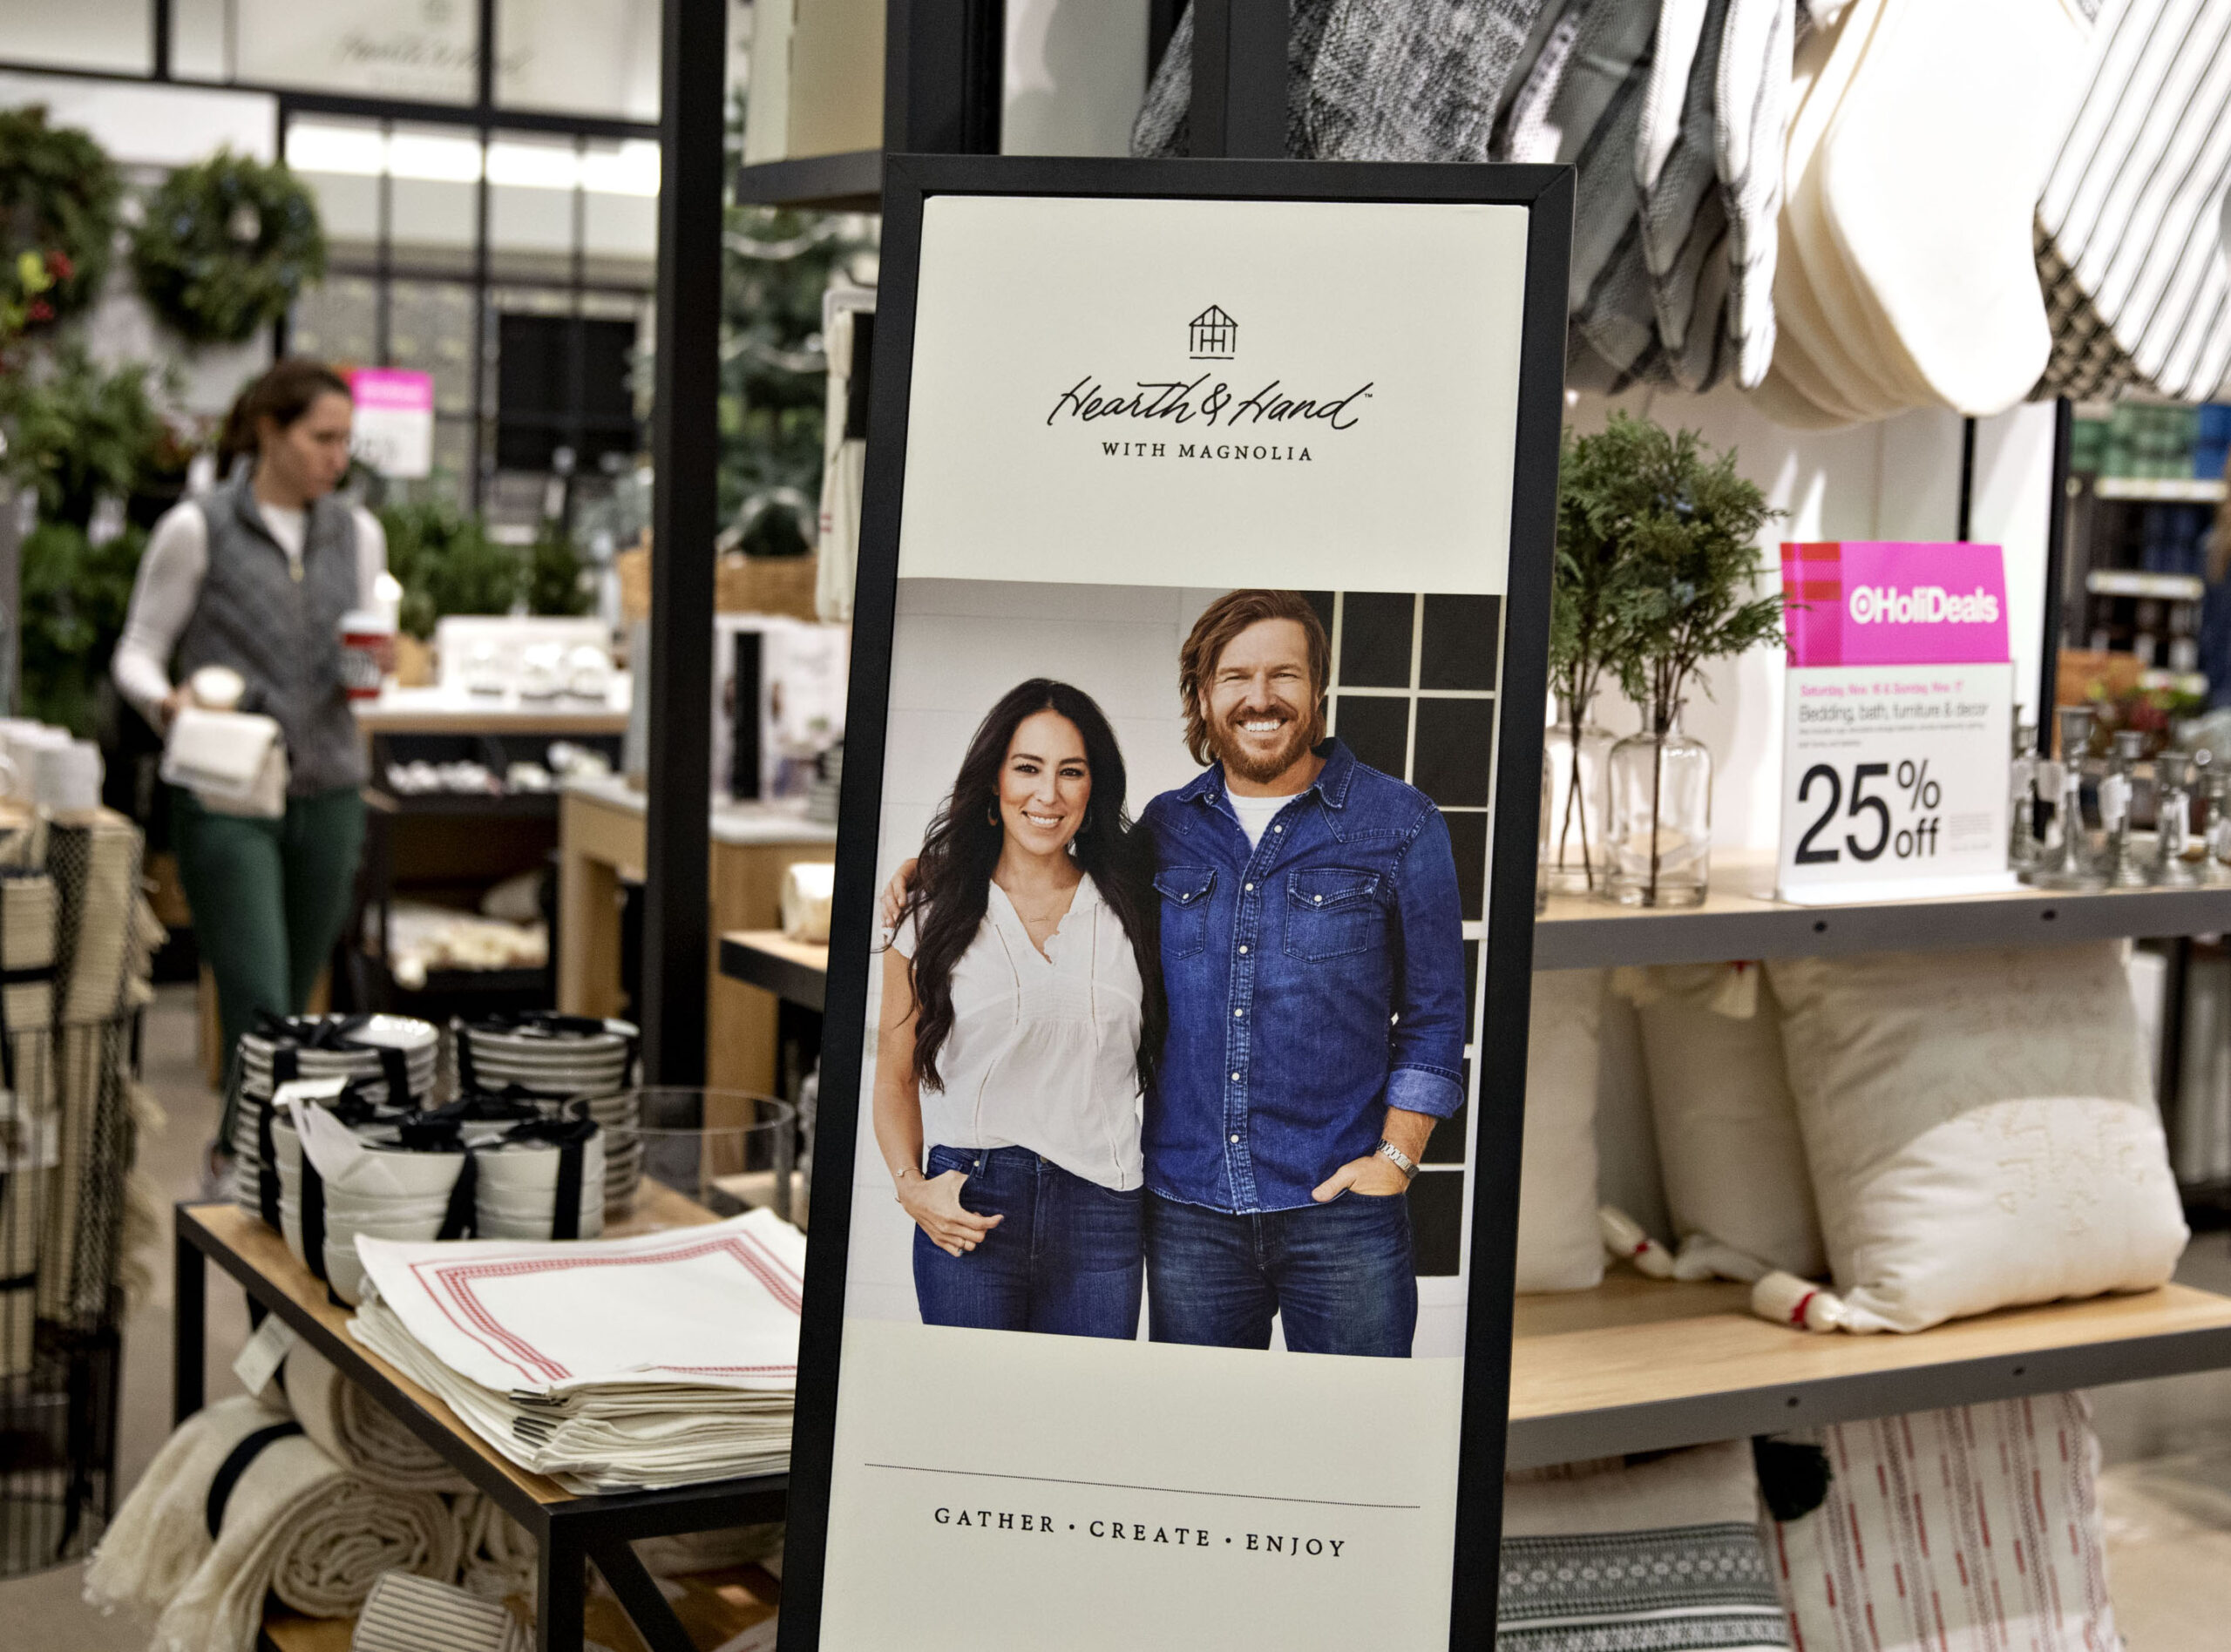 Fans Urge Chip And Joanna Gaines To Cut Ties With Target Amid Pride Collection Backlash